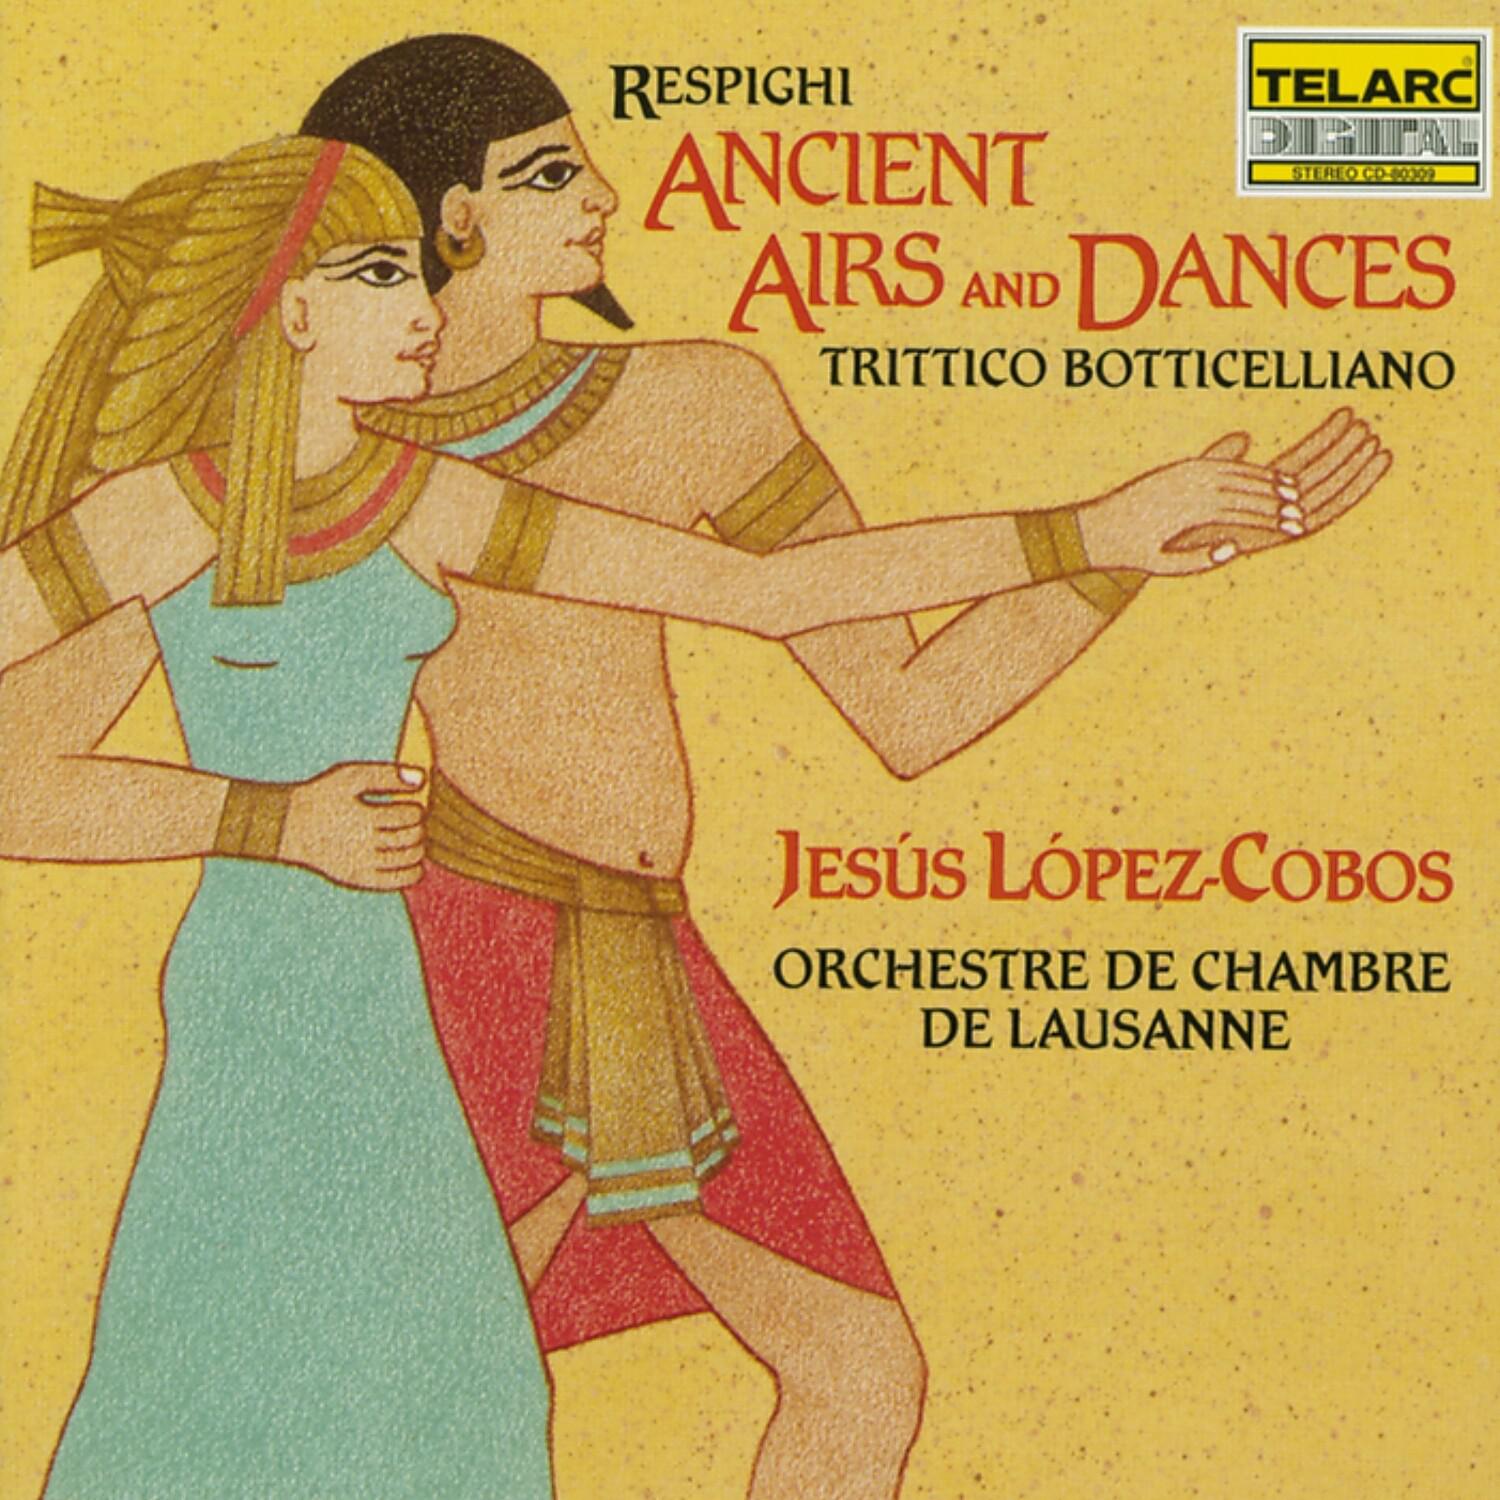 Ancient Airs and Dances, Suite No. 3: III. Anon.: Siciliana